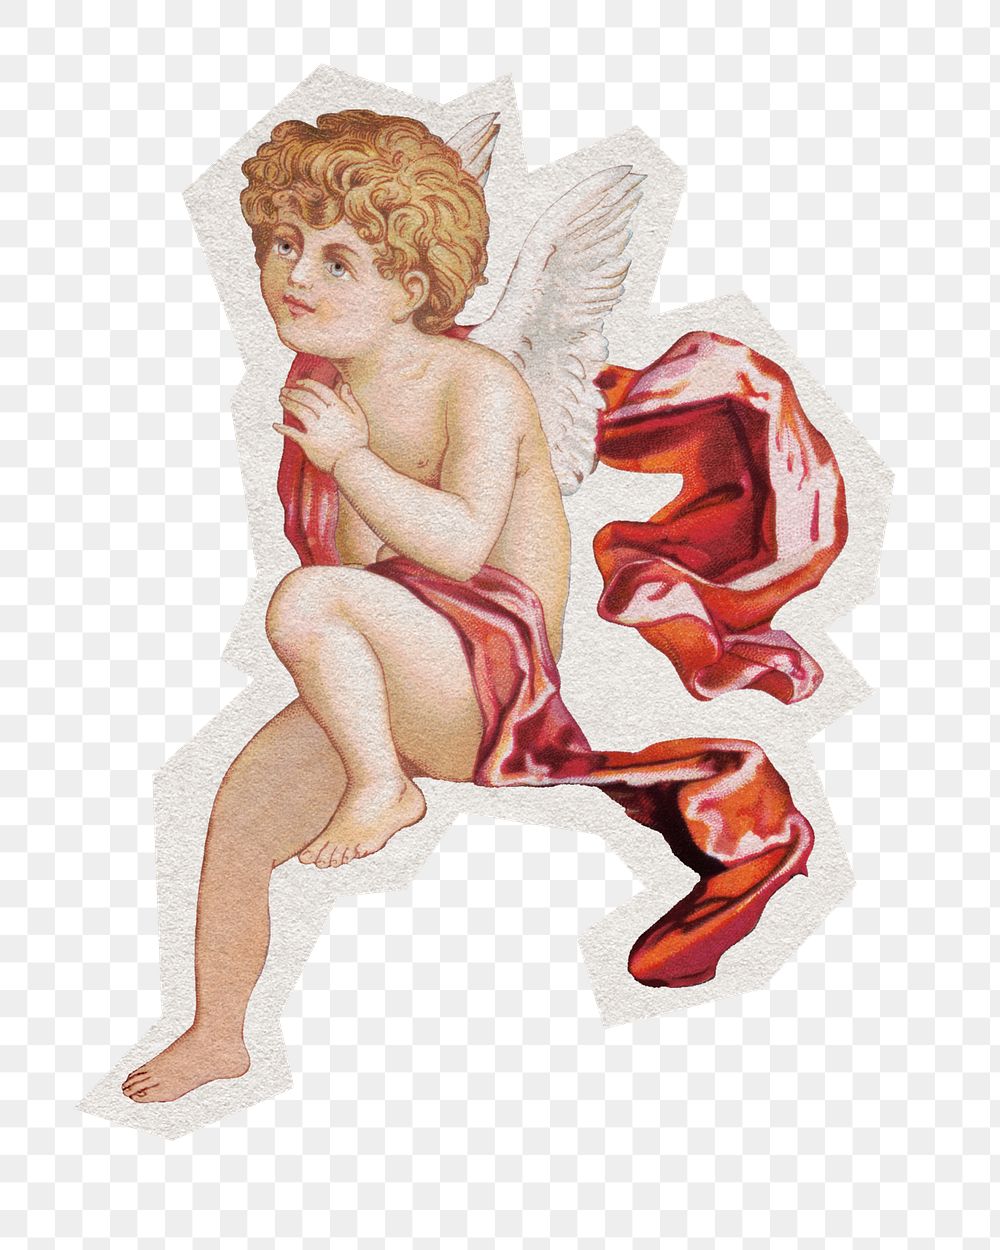 Sitting cherub png sticker, illustration by Obpacher Bros on transparent background, remixed by rawpixel.